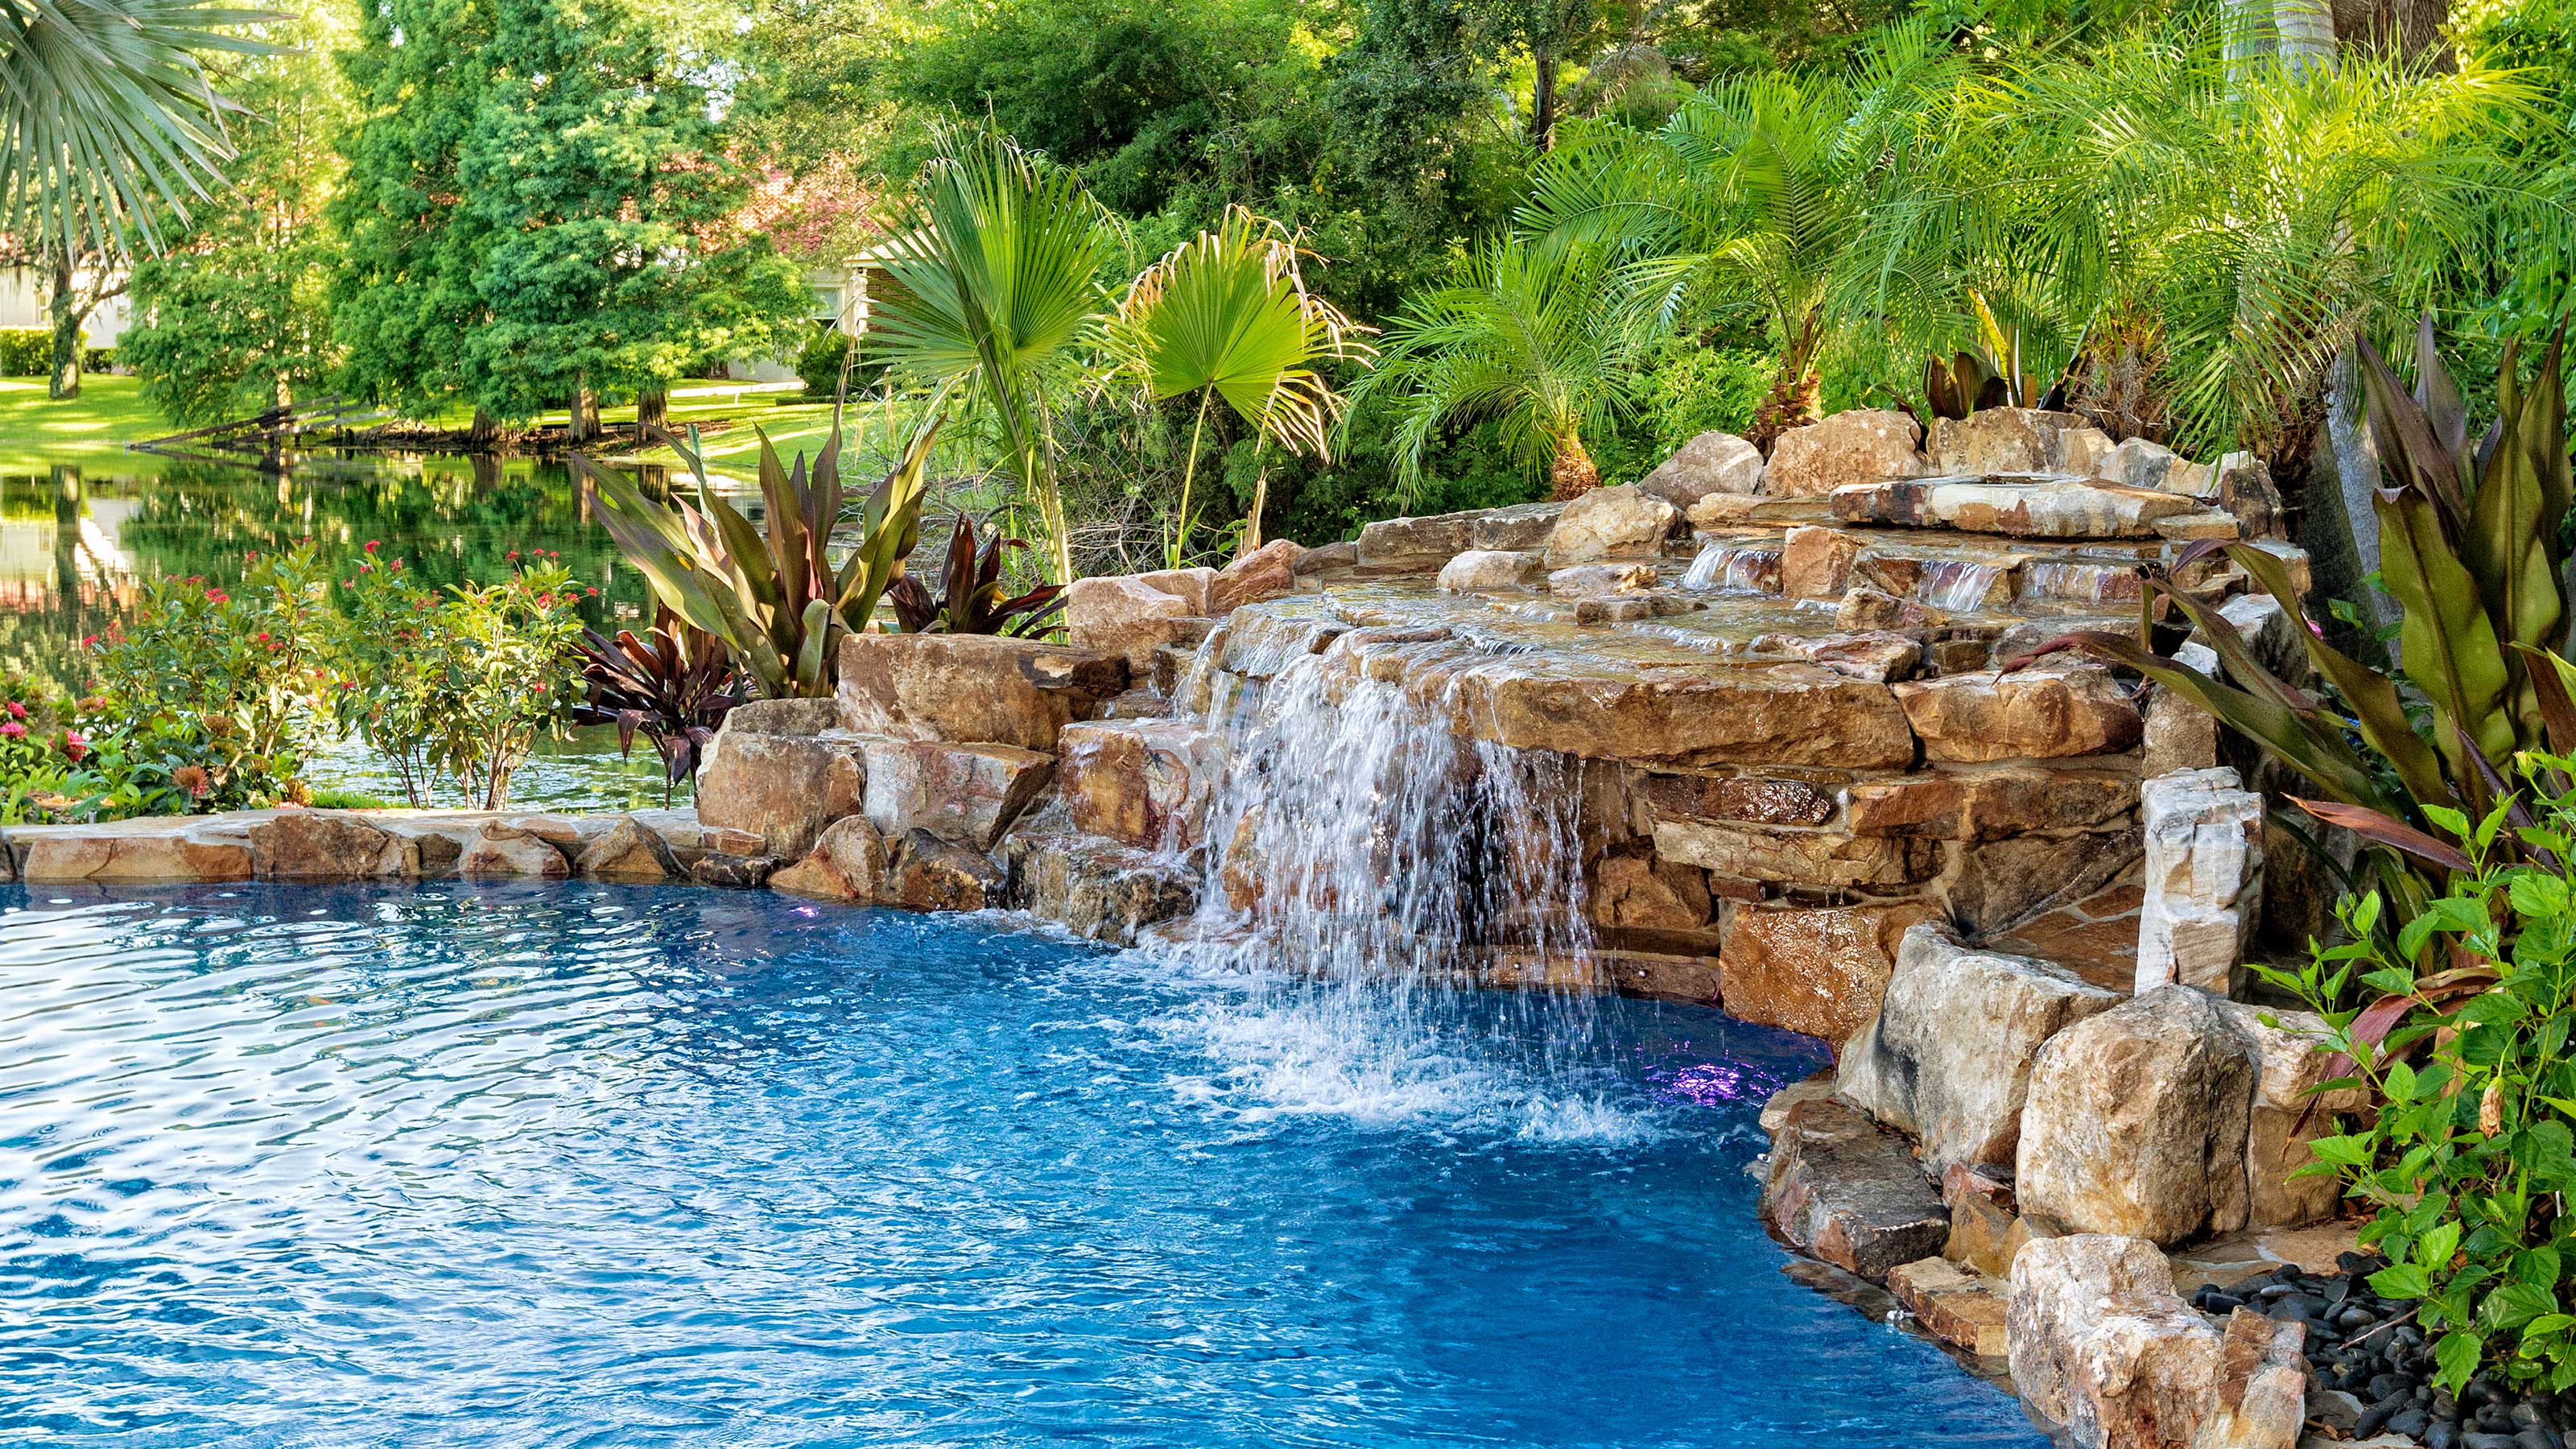 A Water Feature Turns Your Backyard Into a Tranquil Oasis